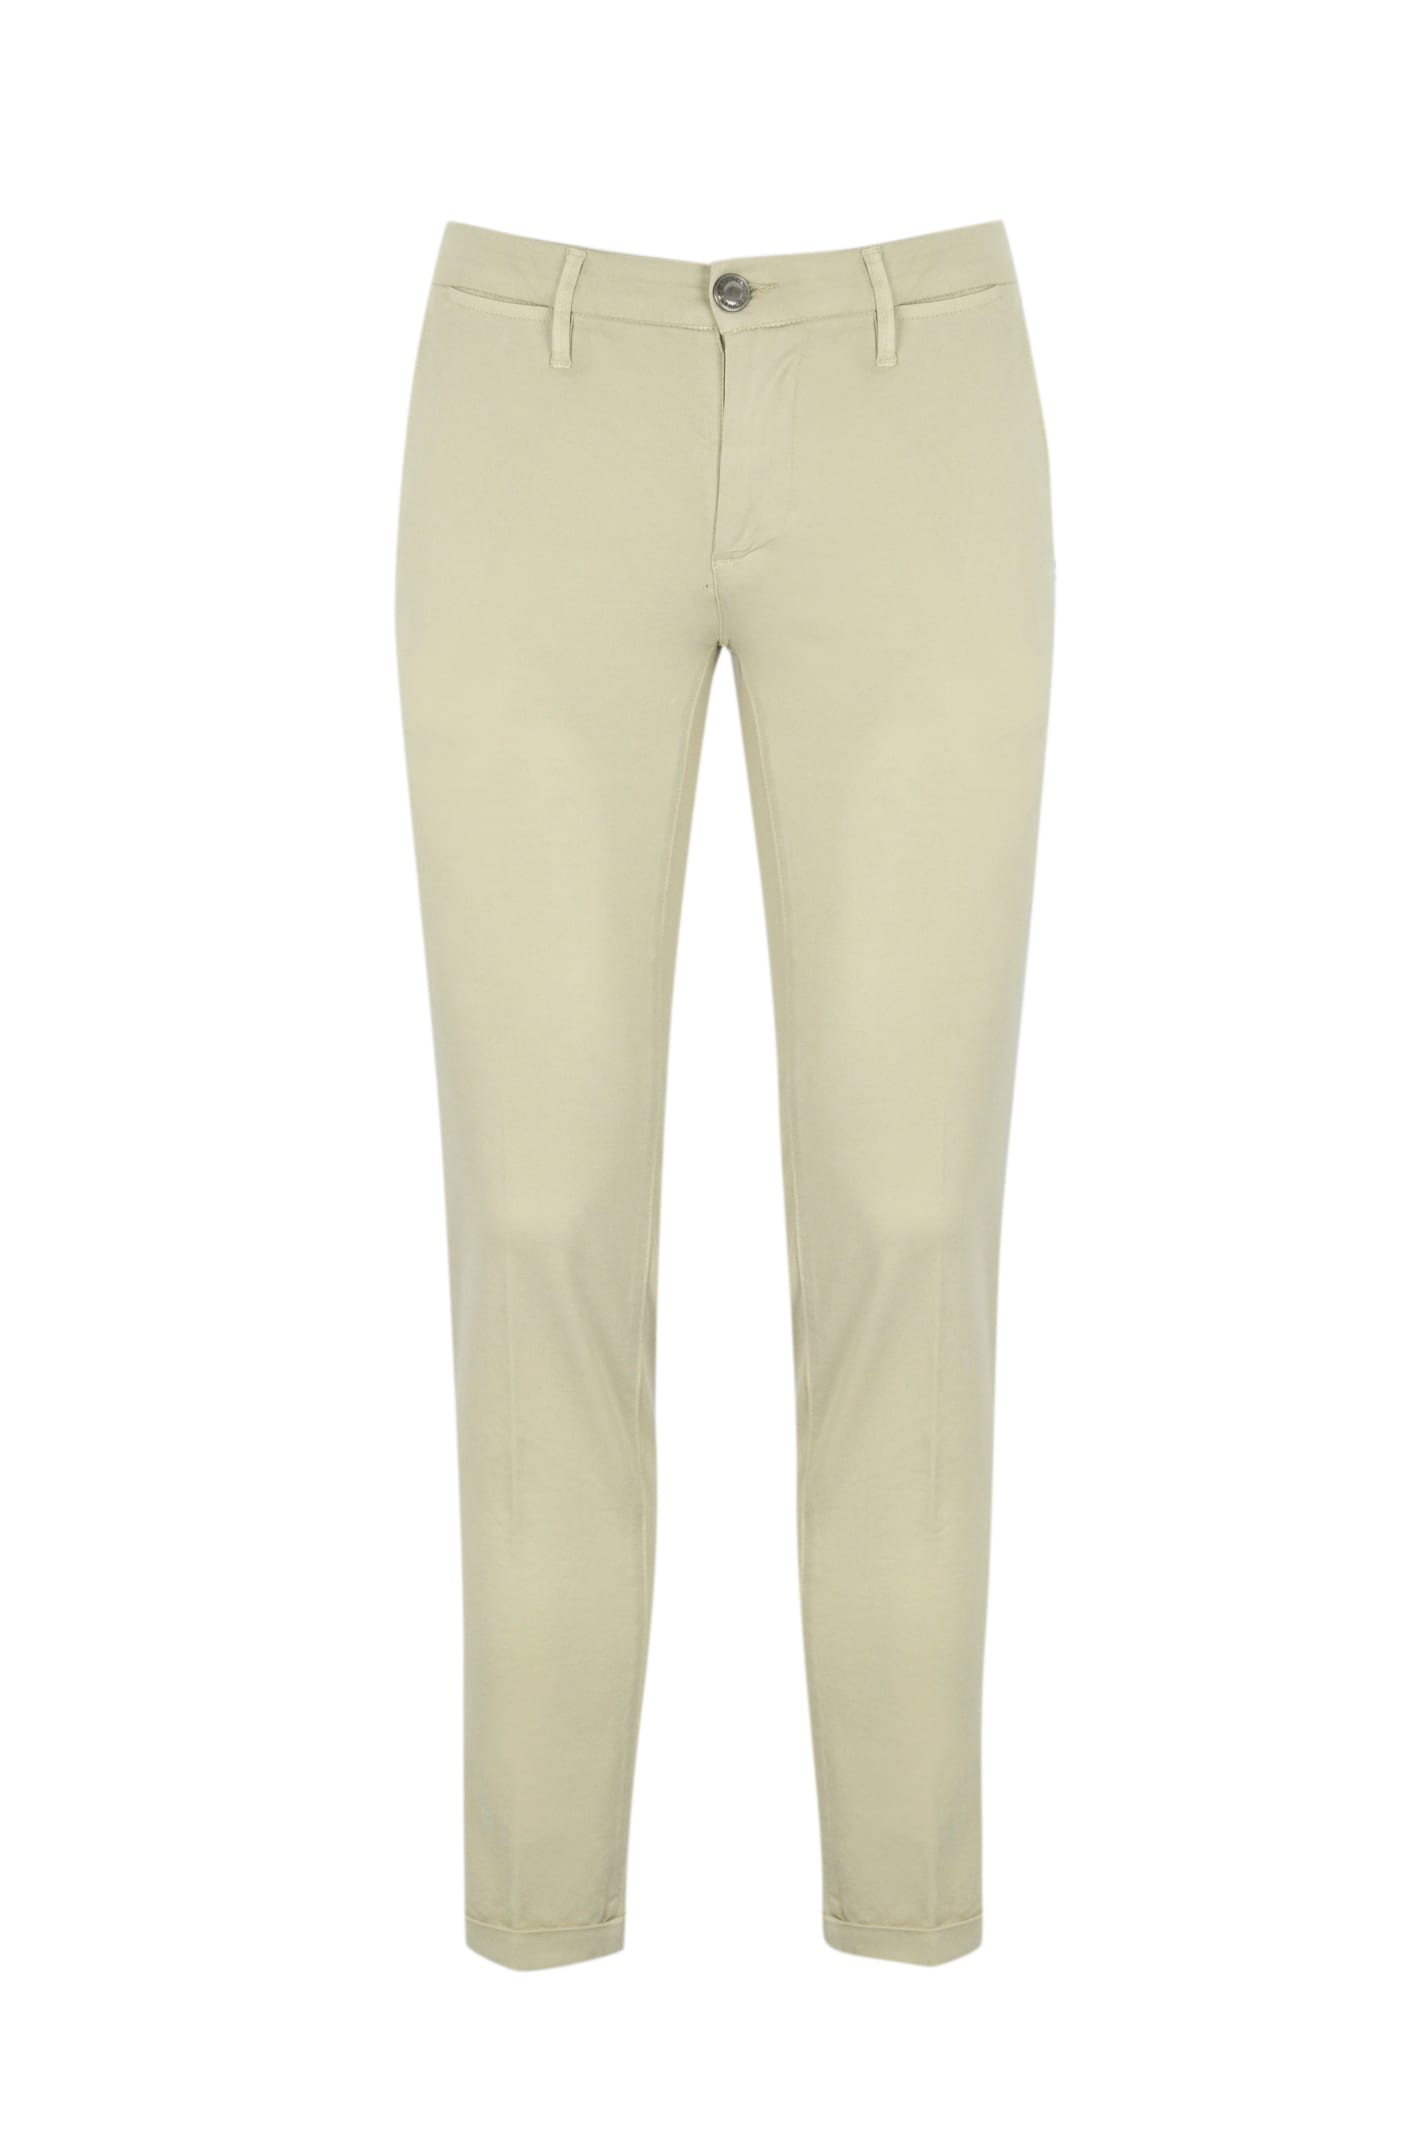 Re-HasH Chino Trousers